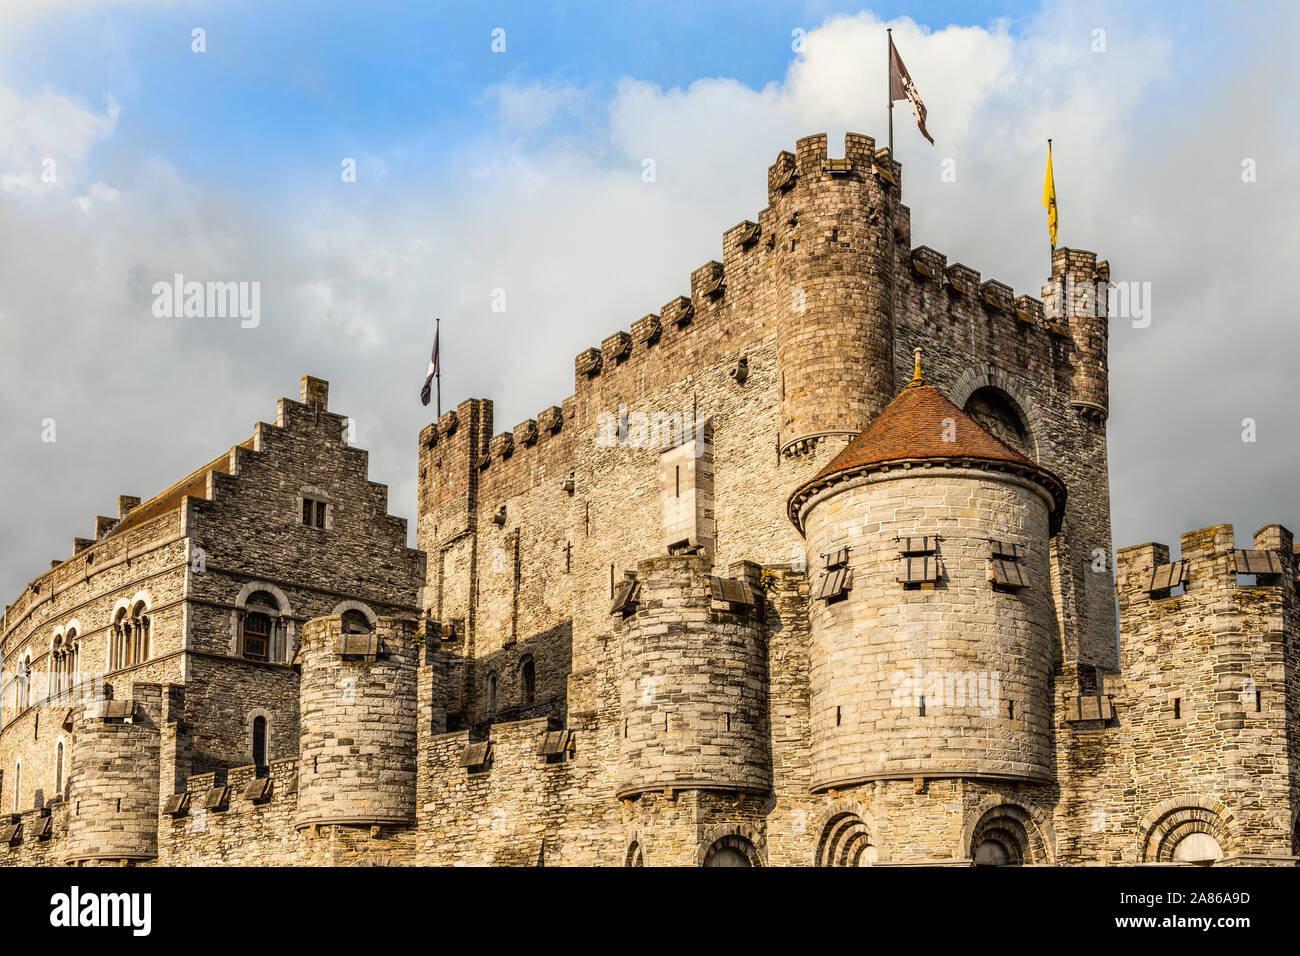 Fortified walls and towers of Gravensteen medieval castle with moat in the foreground, Ghent East Flanders, Belgium Stock Photo